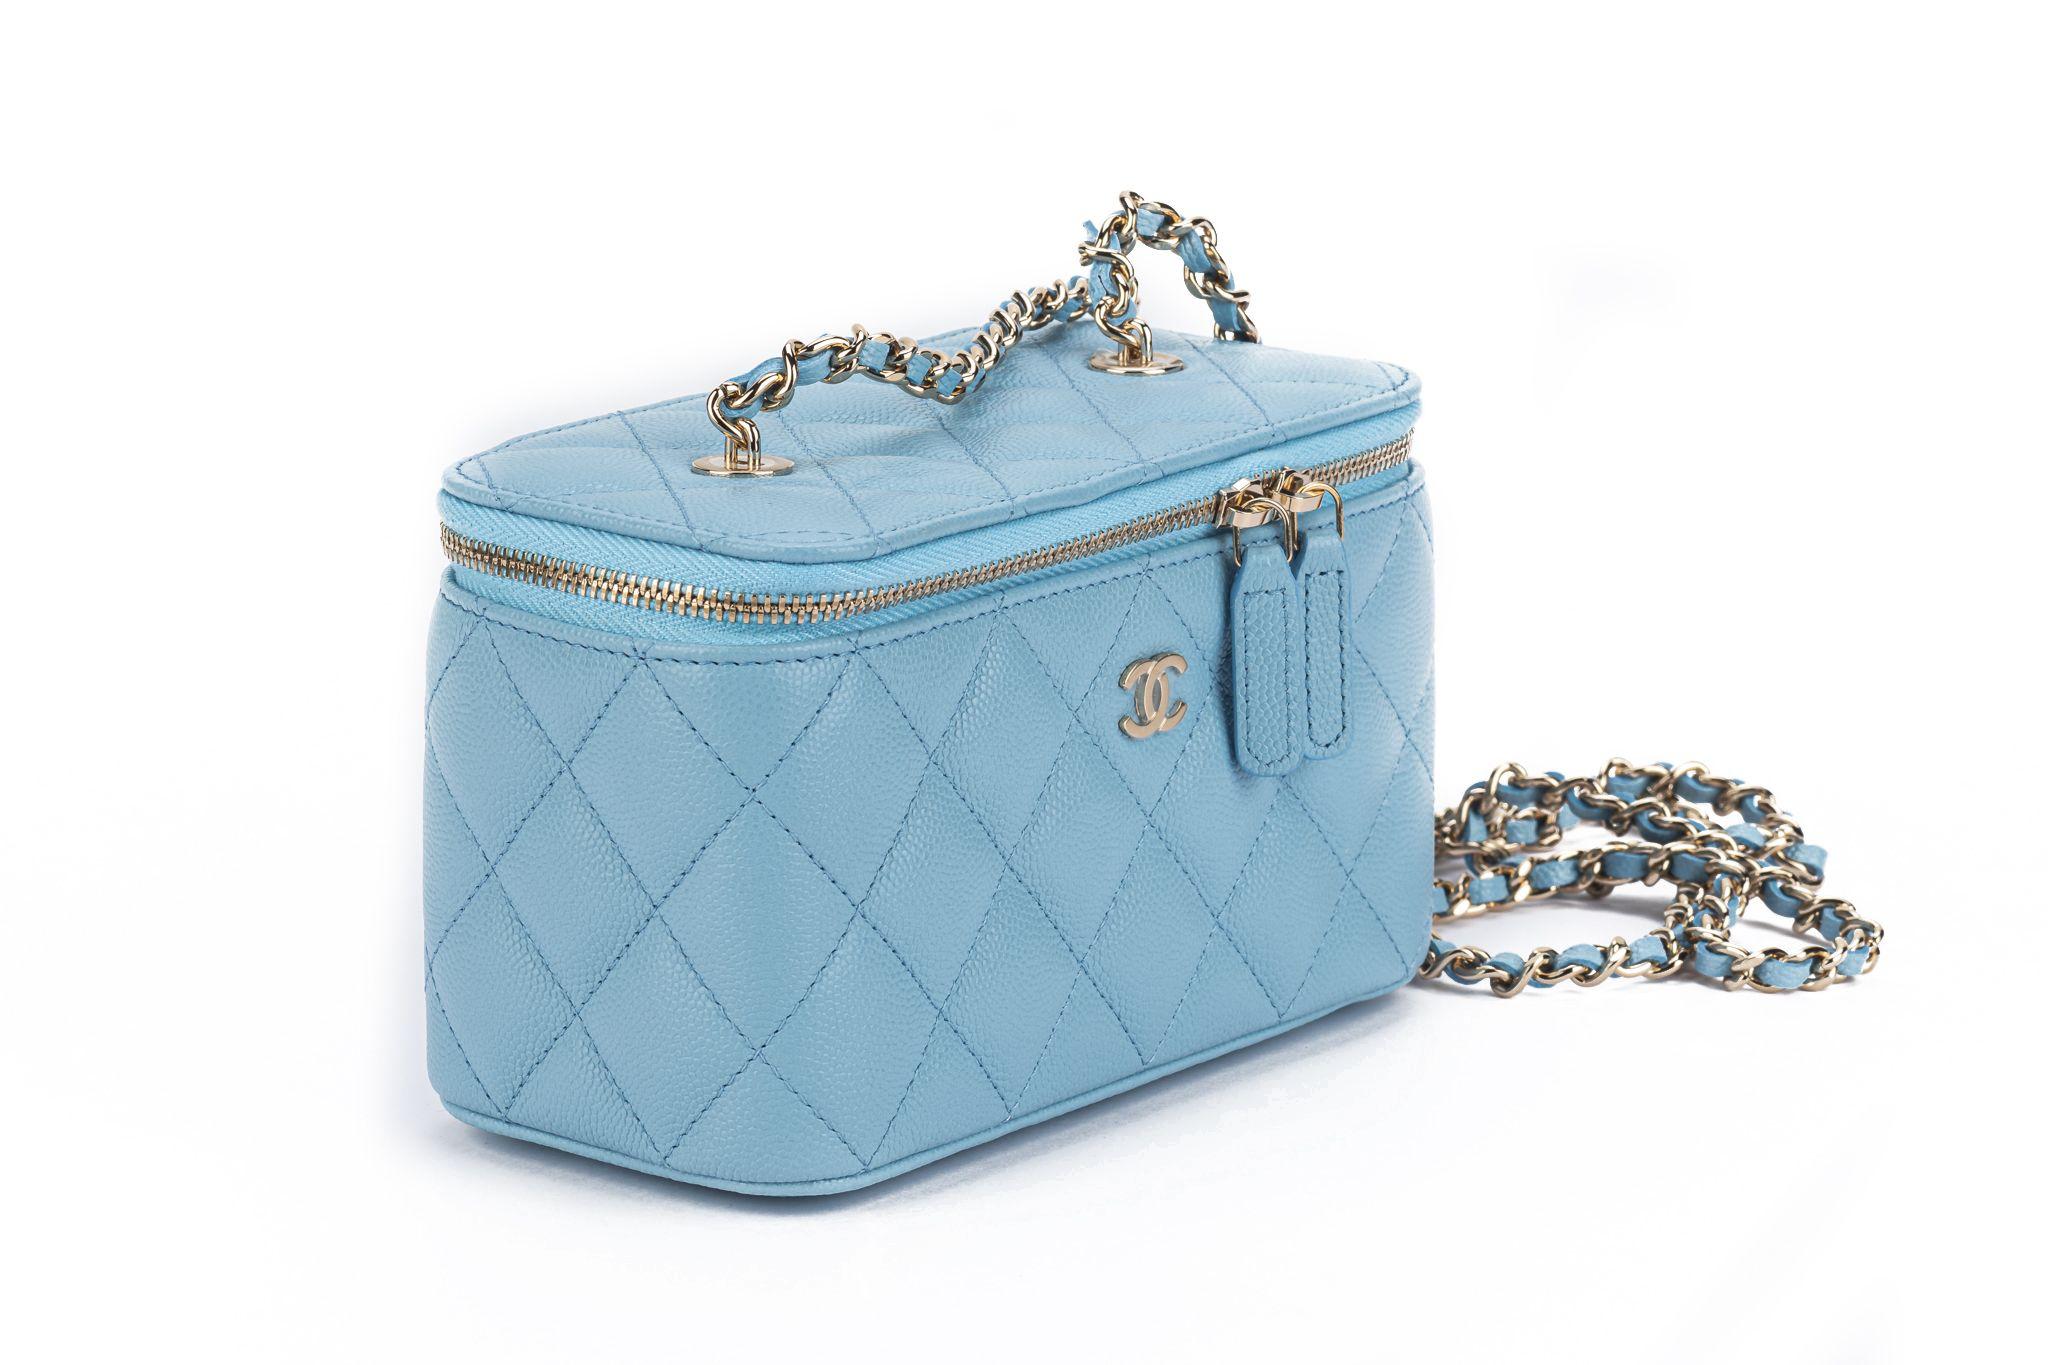 Chanel brand new 2022 collection celeste caviar  quilted small rectangular trunk bag. Shoulder drop 22”. Serial number 32. Hologram, ID card, dust cover and box.